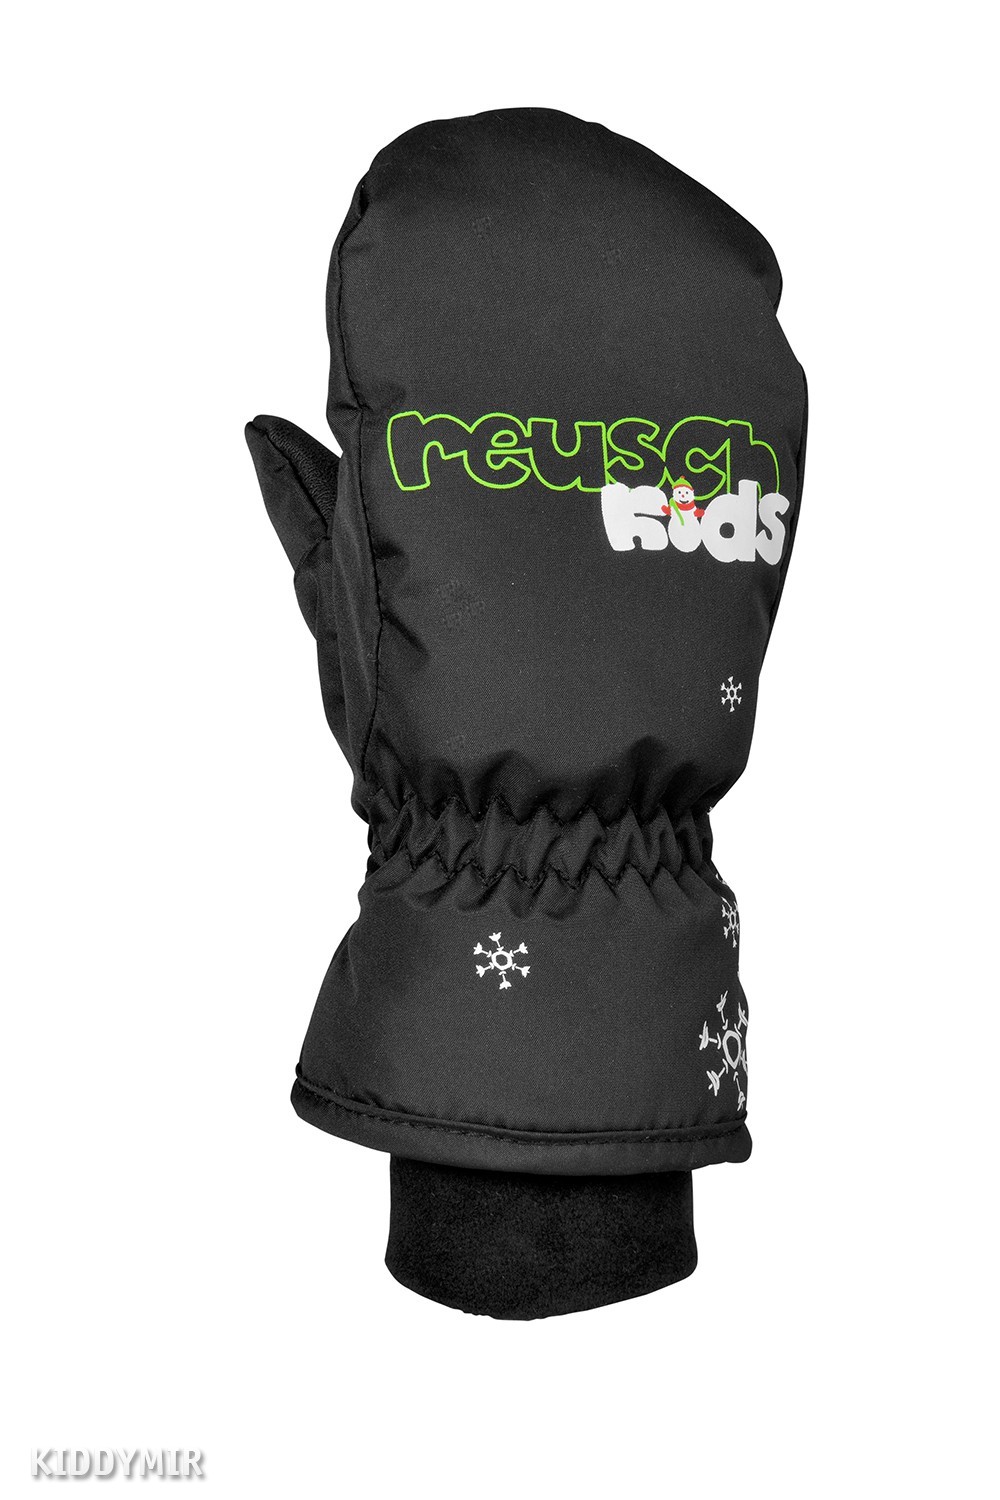 Варежки Reusch 17-18 Kids Mitten Black 1 pairs new womens winter touchscreen gloves cable knit warm lined 3 fingers dual layer touch screen texting mitten glove